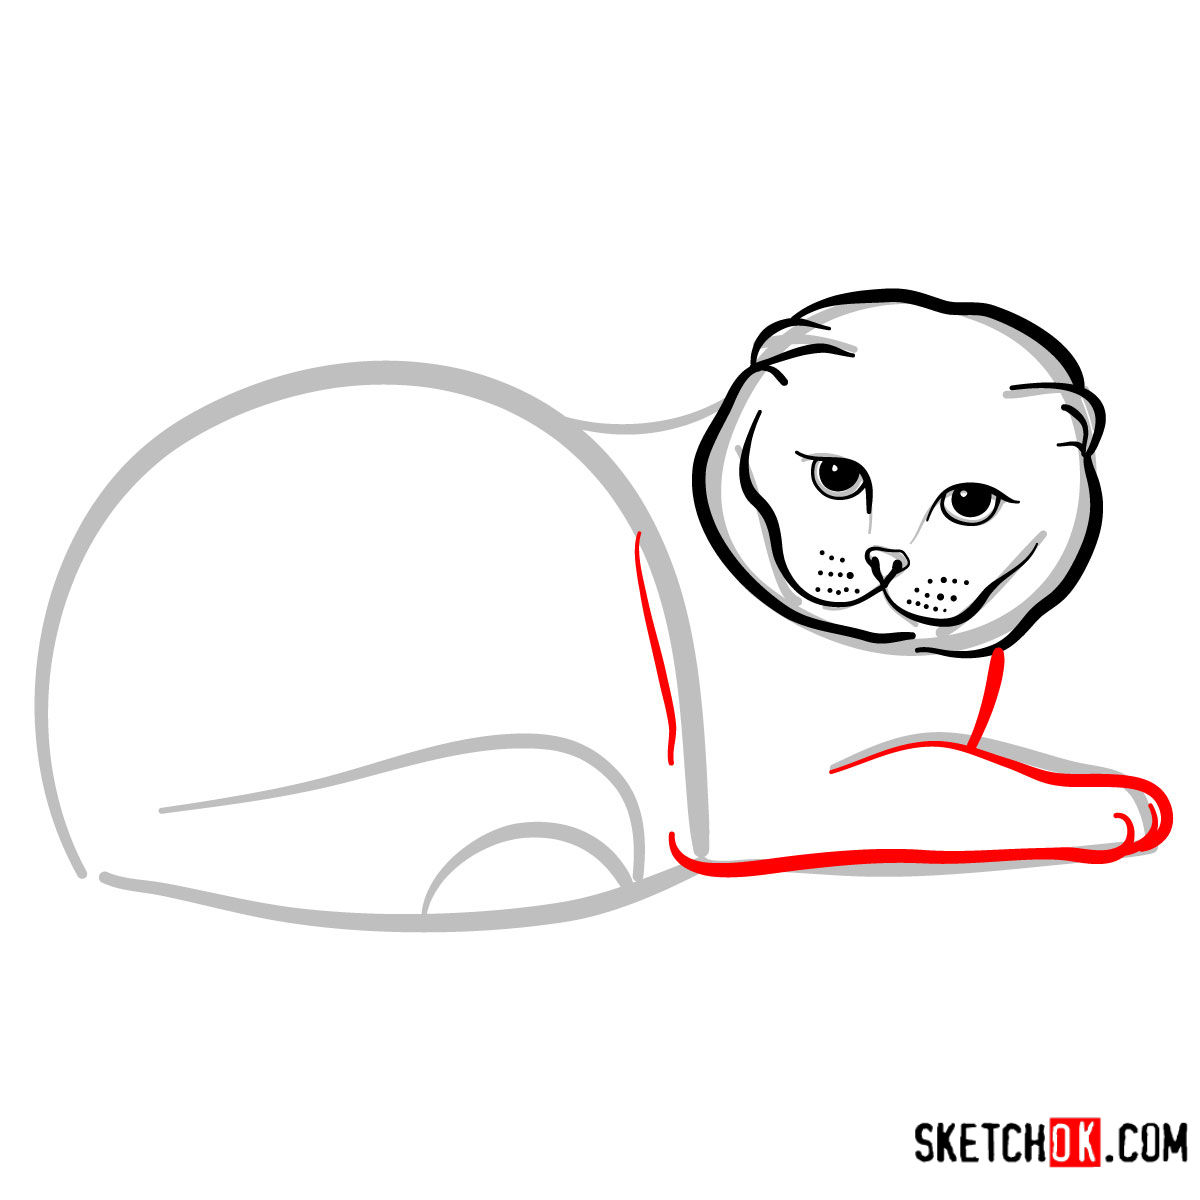 How to draw the Scottish Fold cat - step 06